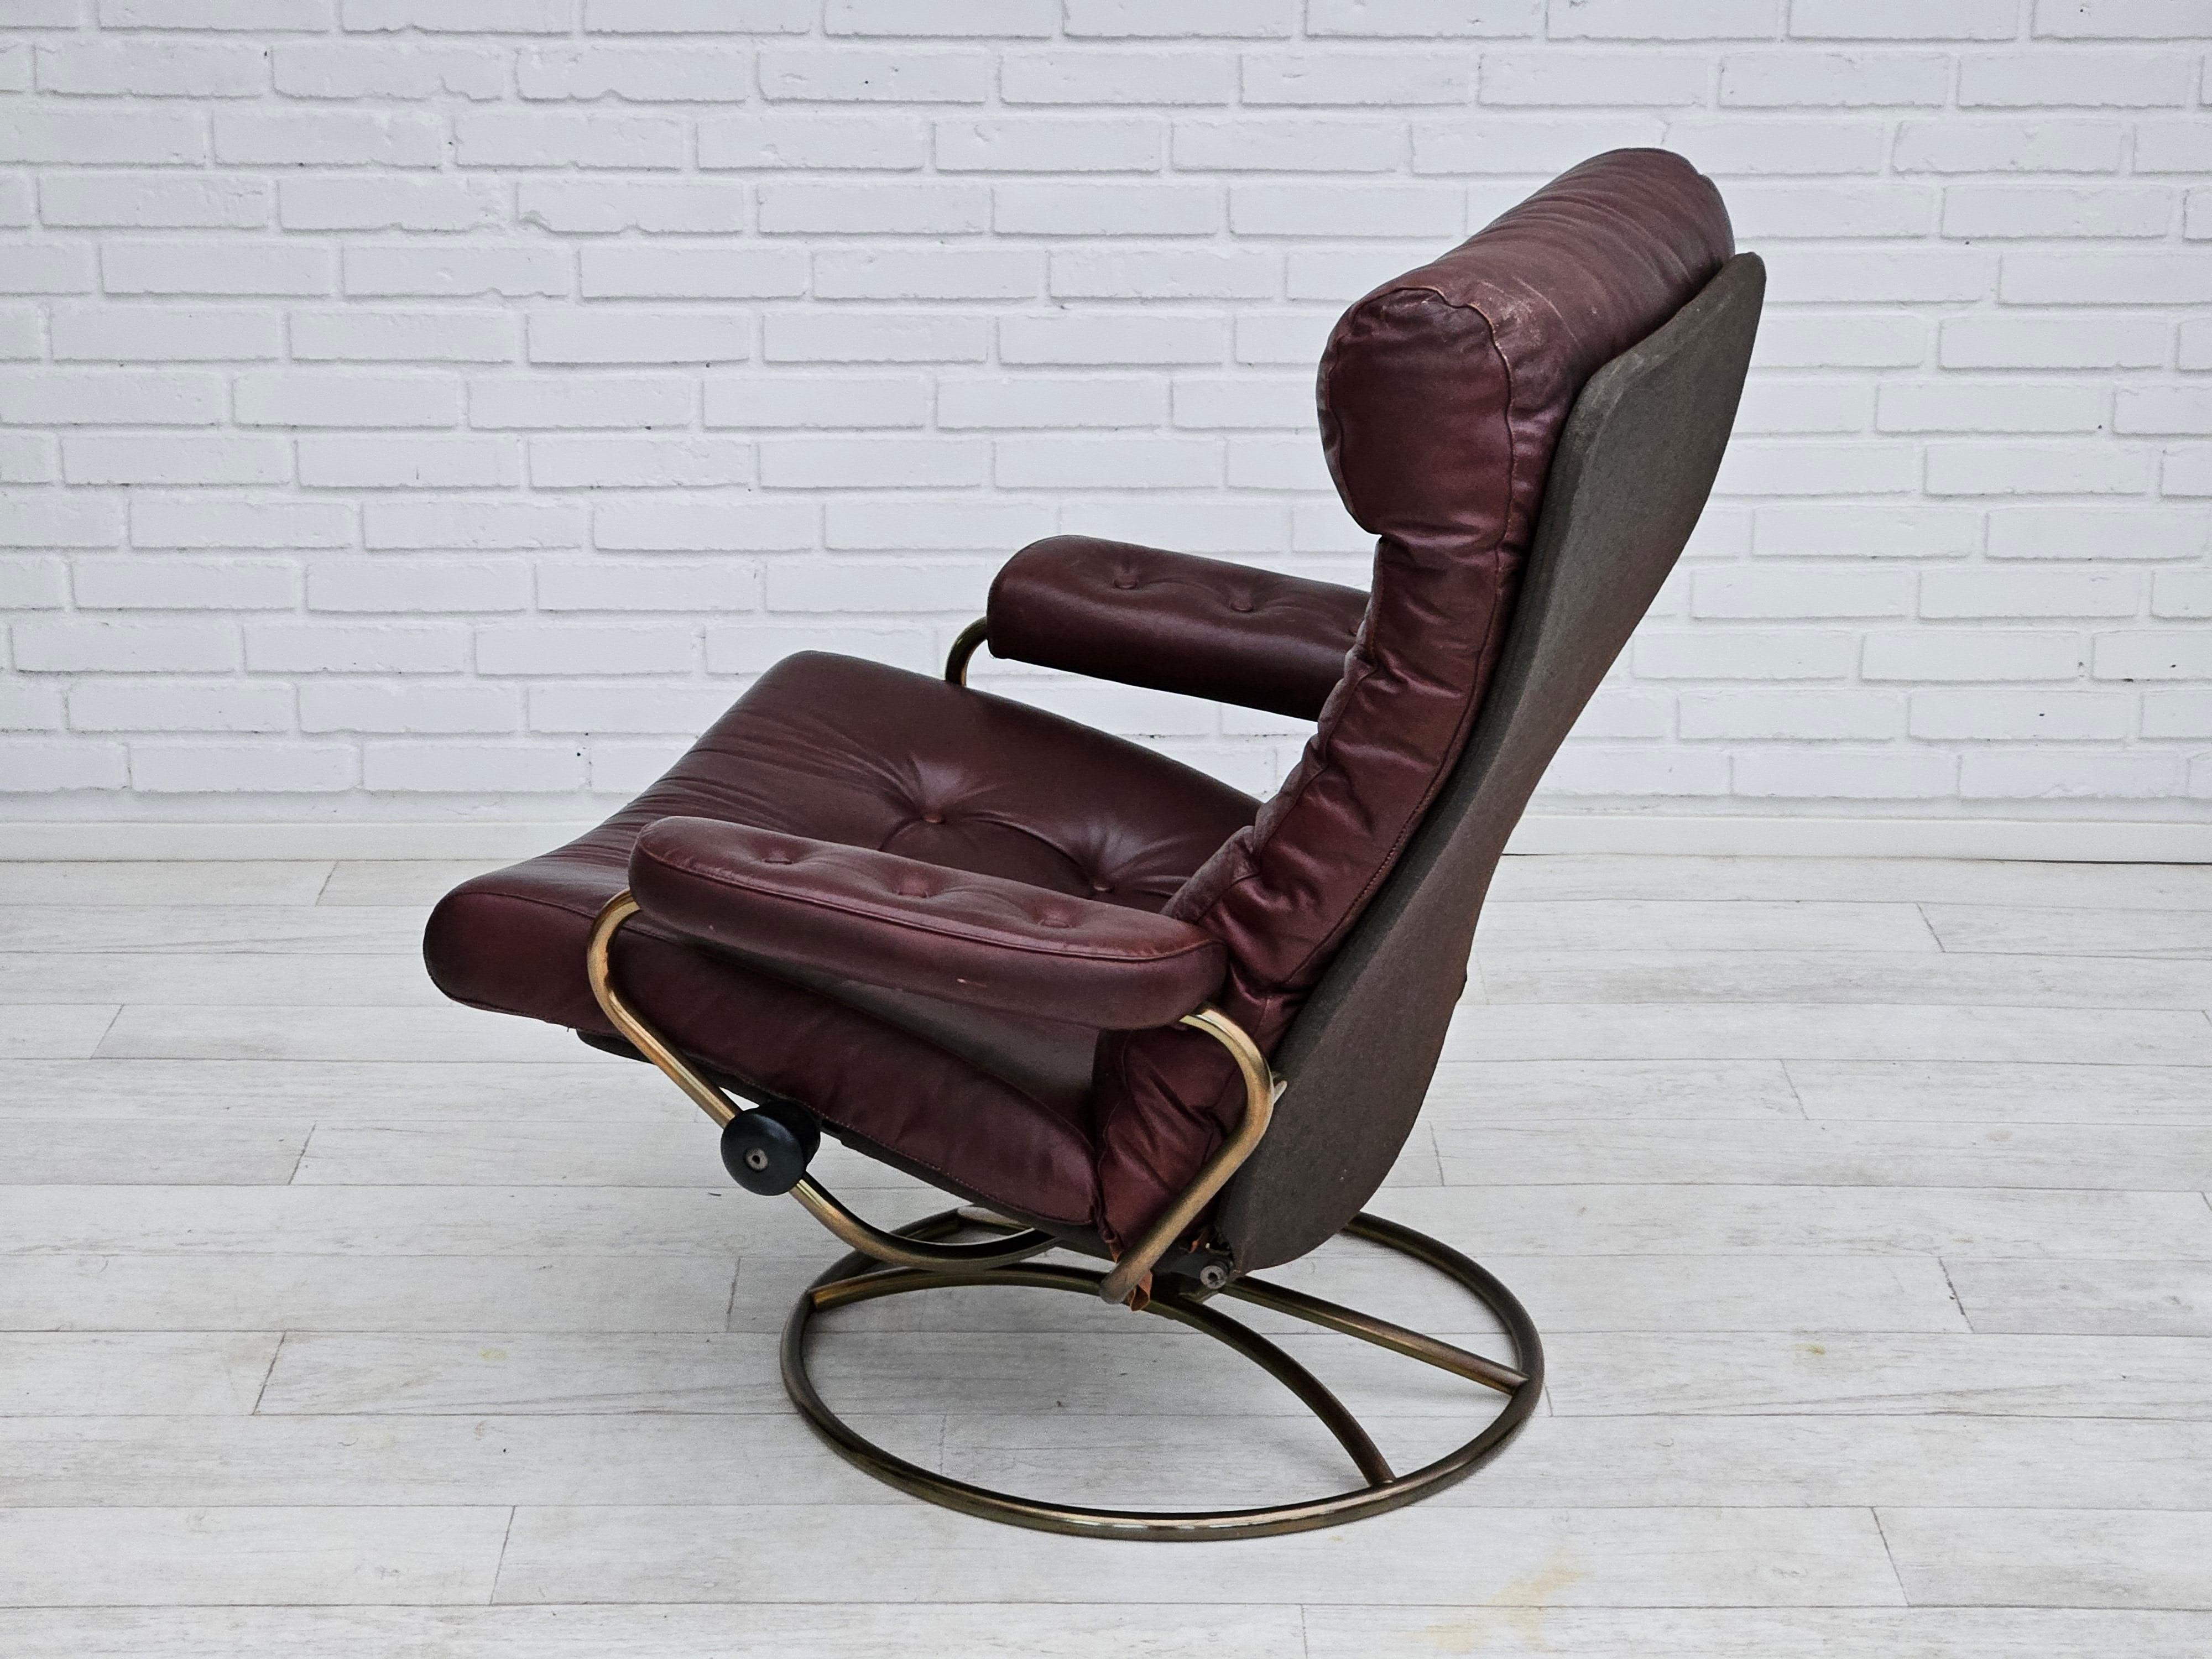 1970s, Norwegian relax swivel chair by Stressless, original very good condition. 8